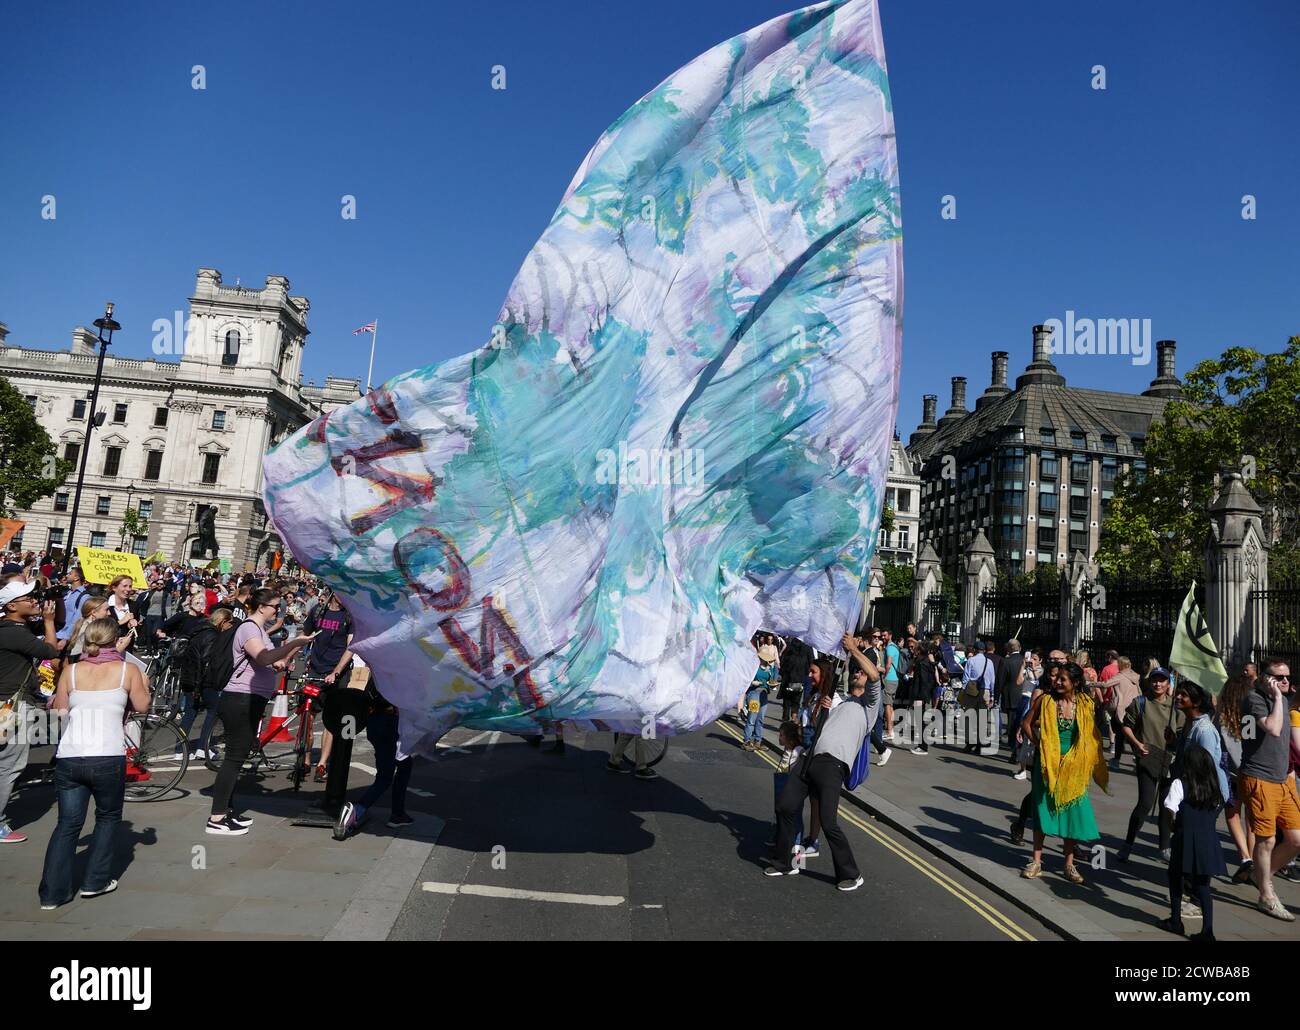 Protesters march near Parliament, London, during the 20th September 2019 climate strike. Also known as the Global Week for Future, a series of international strikes and protests to demand action be taken to address climate change. The 20 September protests were likely the largest climate strikes in world history. Organisers reported that over 4 million people participated in strikes worldwide, including 300000 people joined UK protests Stock Photo